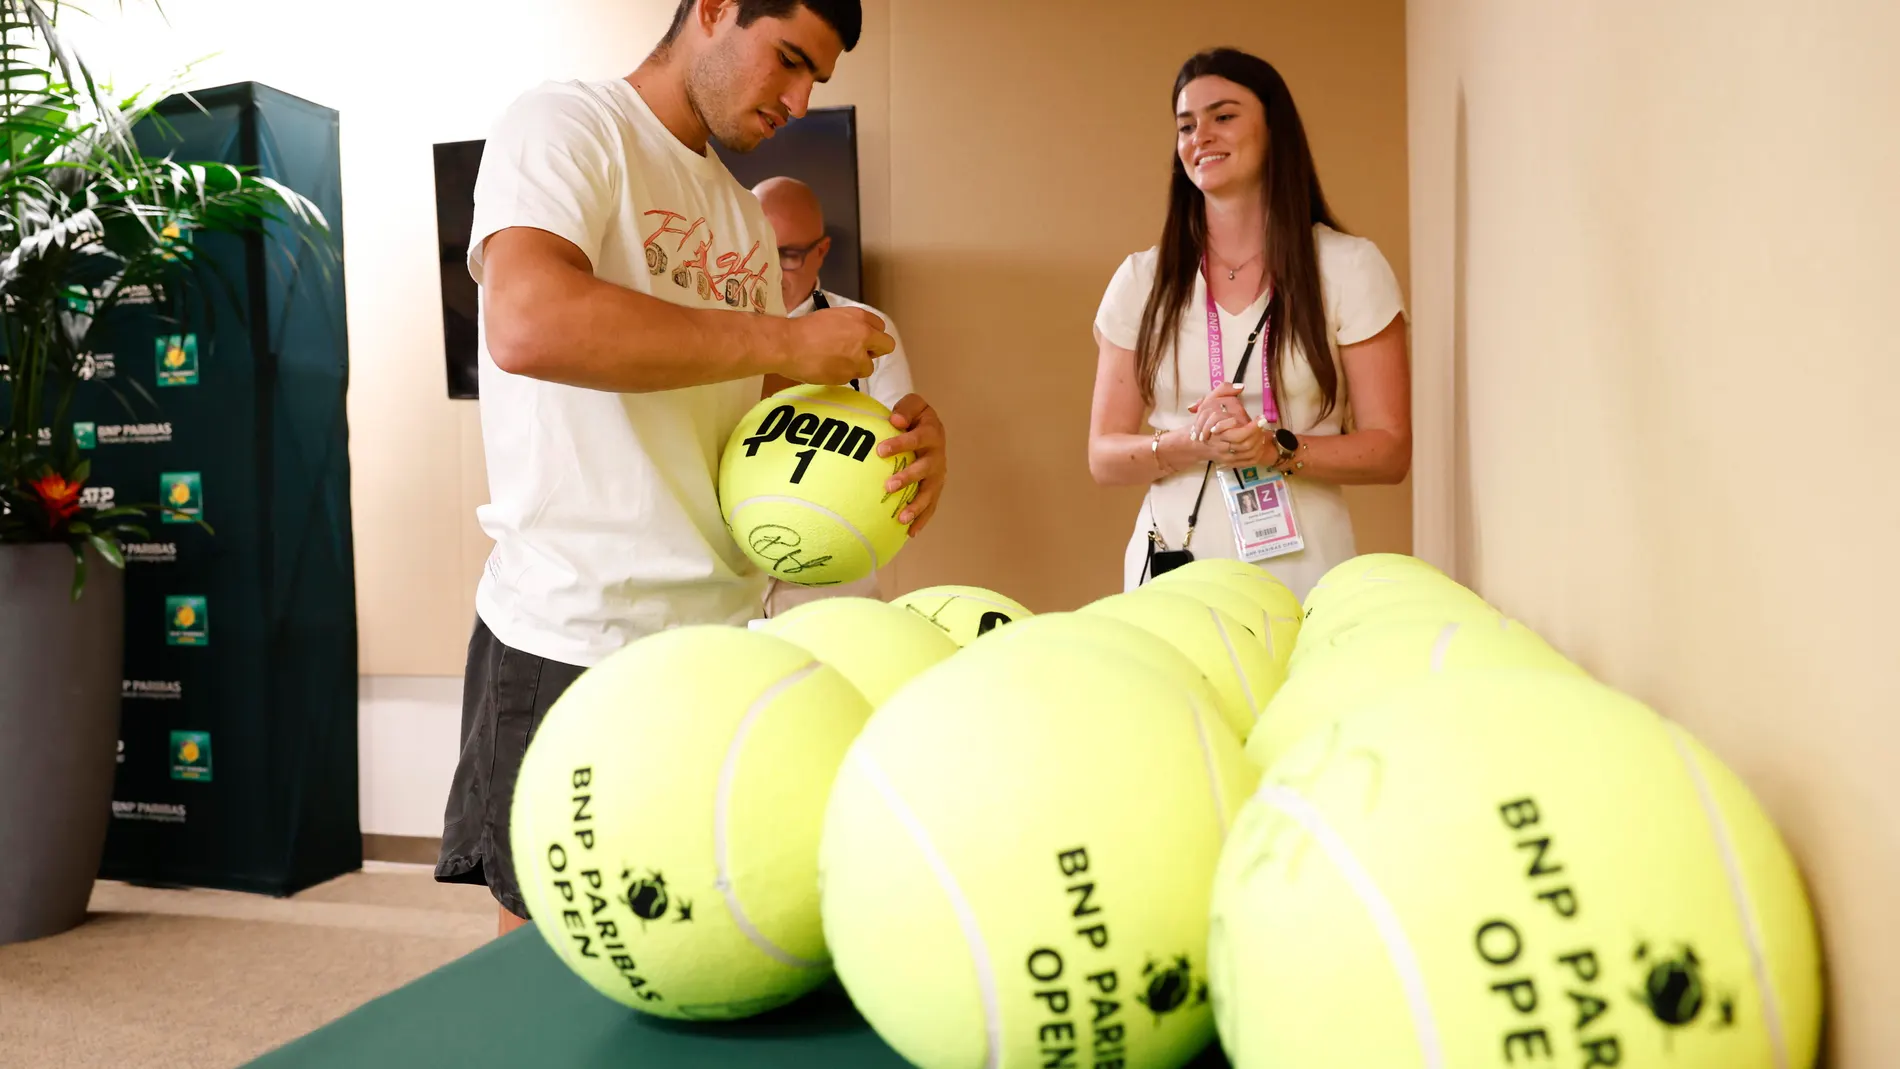 Indian Wells (United States), 06/03/2024.- Carlos Alcaraz (L) of Spain signs souvenir tennis balls during media day at the Indian Wells Open tennis tournament in Indian Wells, California, USA, 06 March 2024. (Tenis, España) EFE/EPA/JOHN G. MABANGLO 